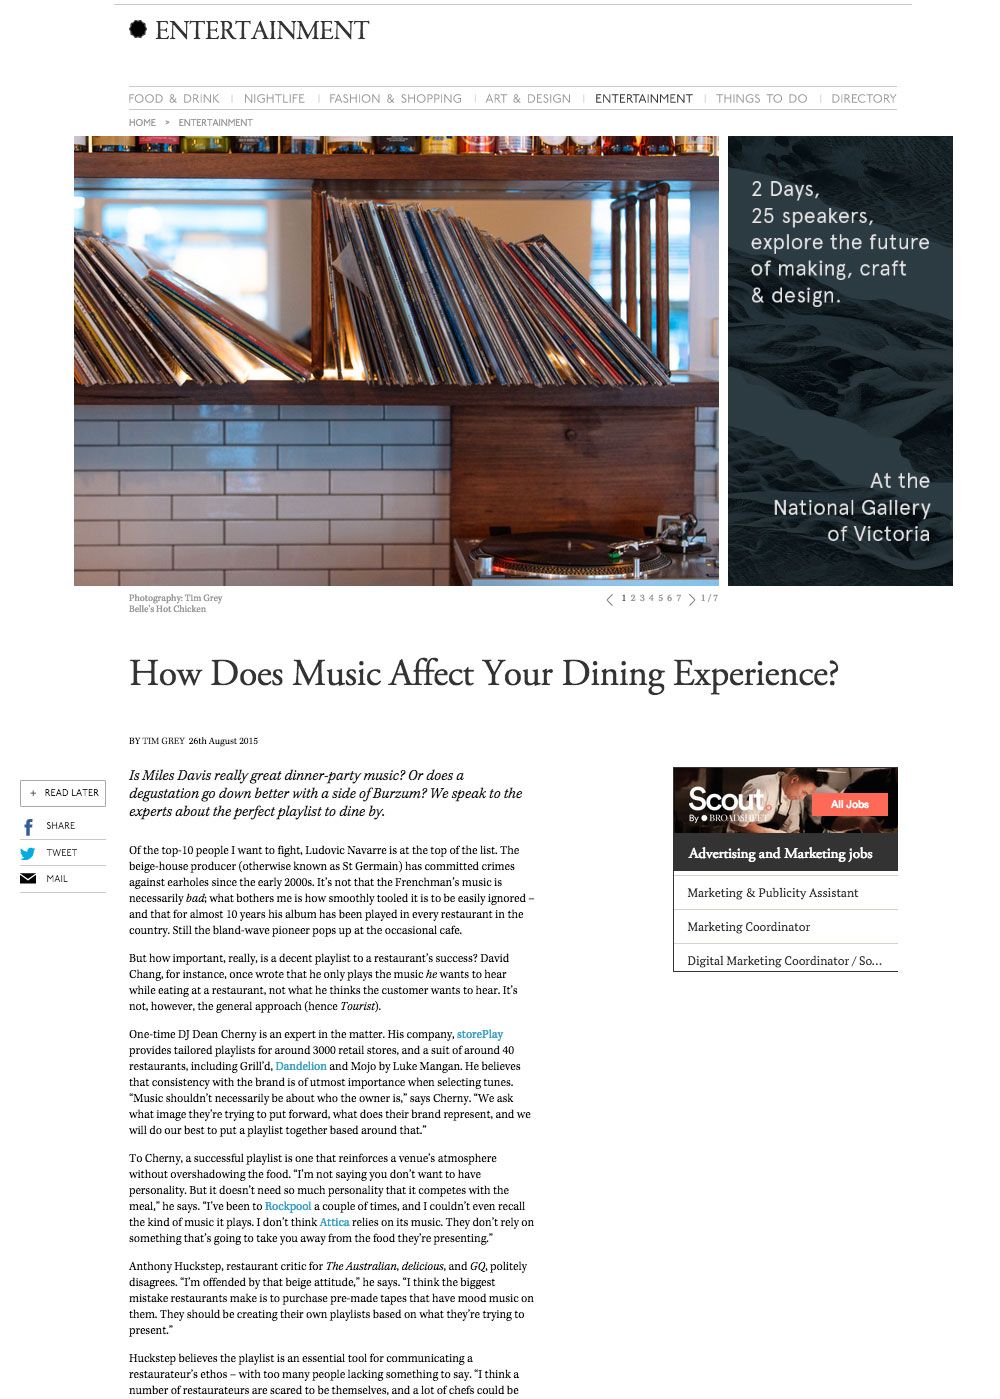 How Does Music Affect Your Dining Experience?